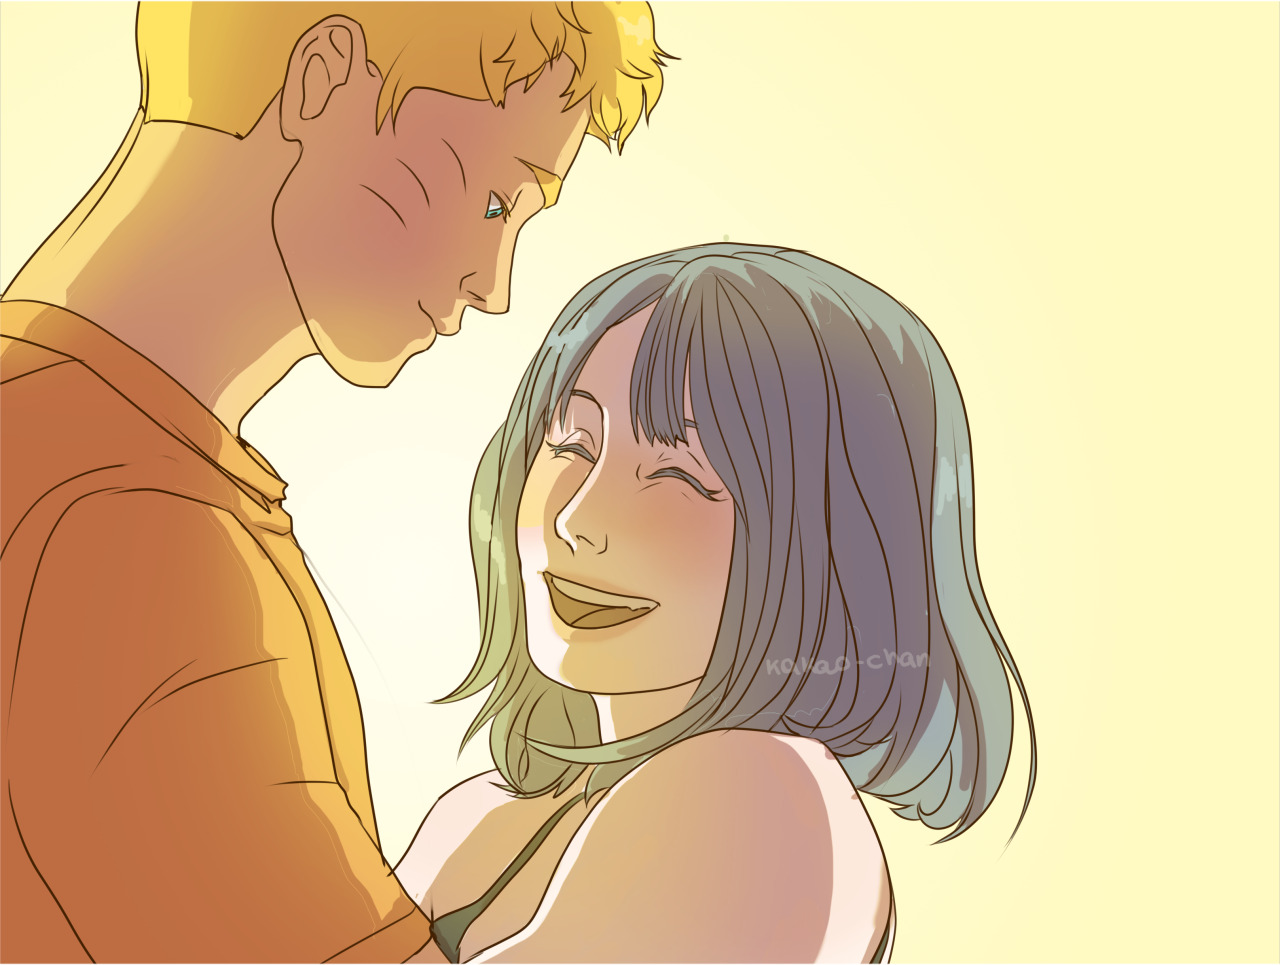 kakao-chan:   NaruHina Month - Day 4: Smile  She might not notice it, but her smile